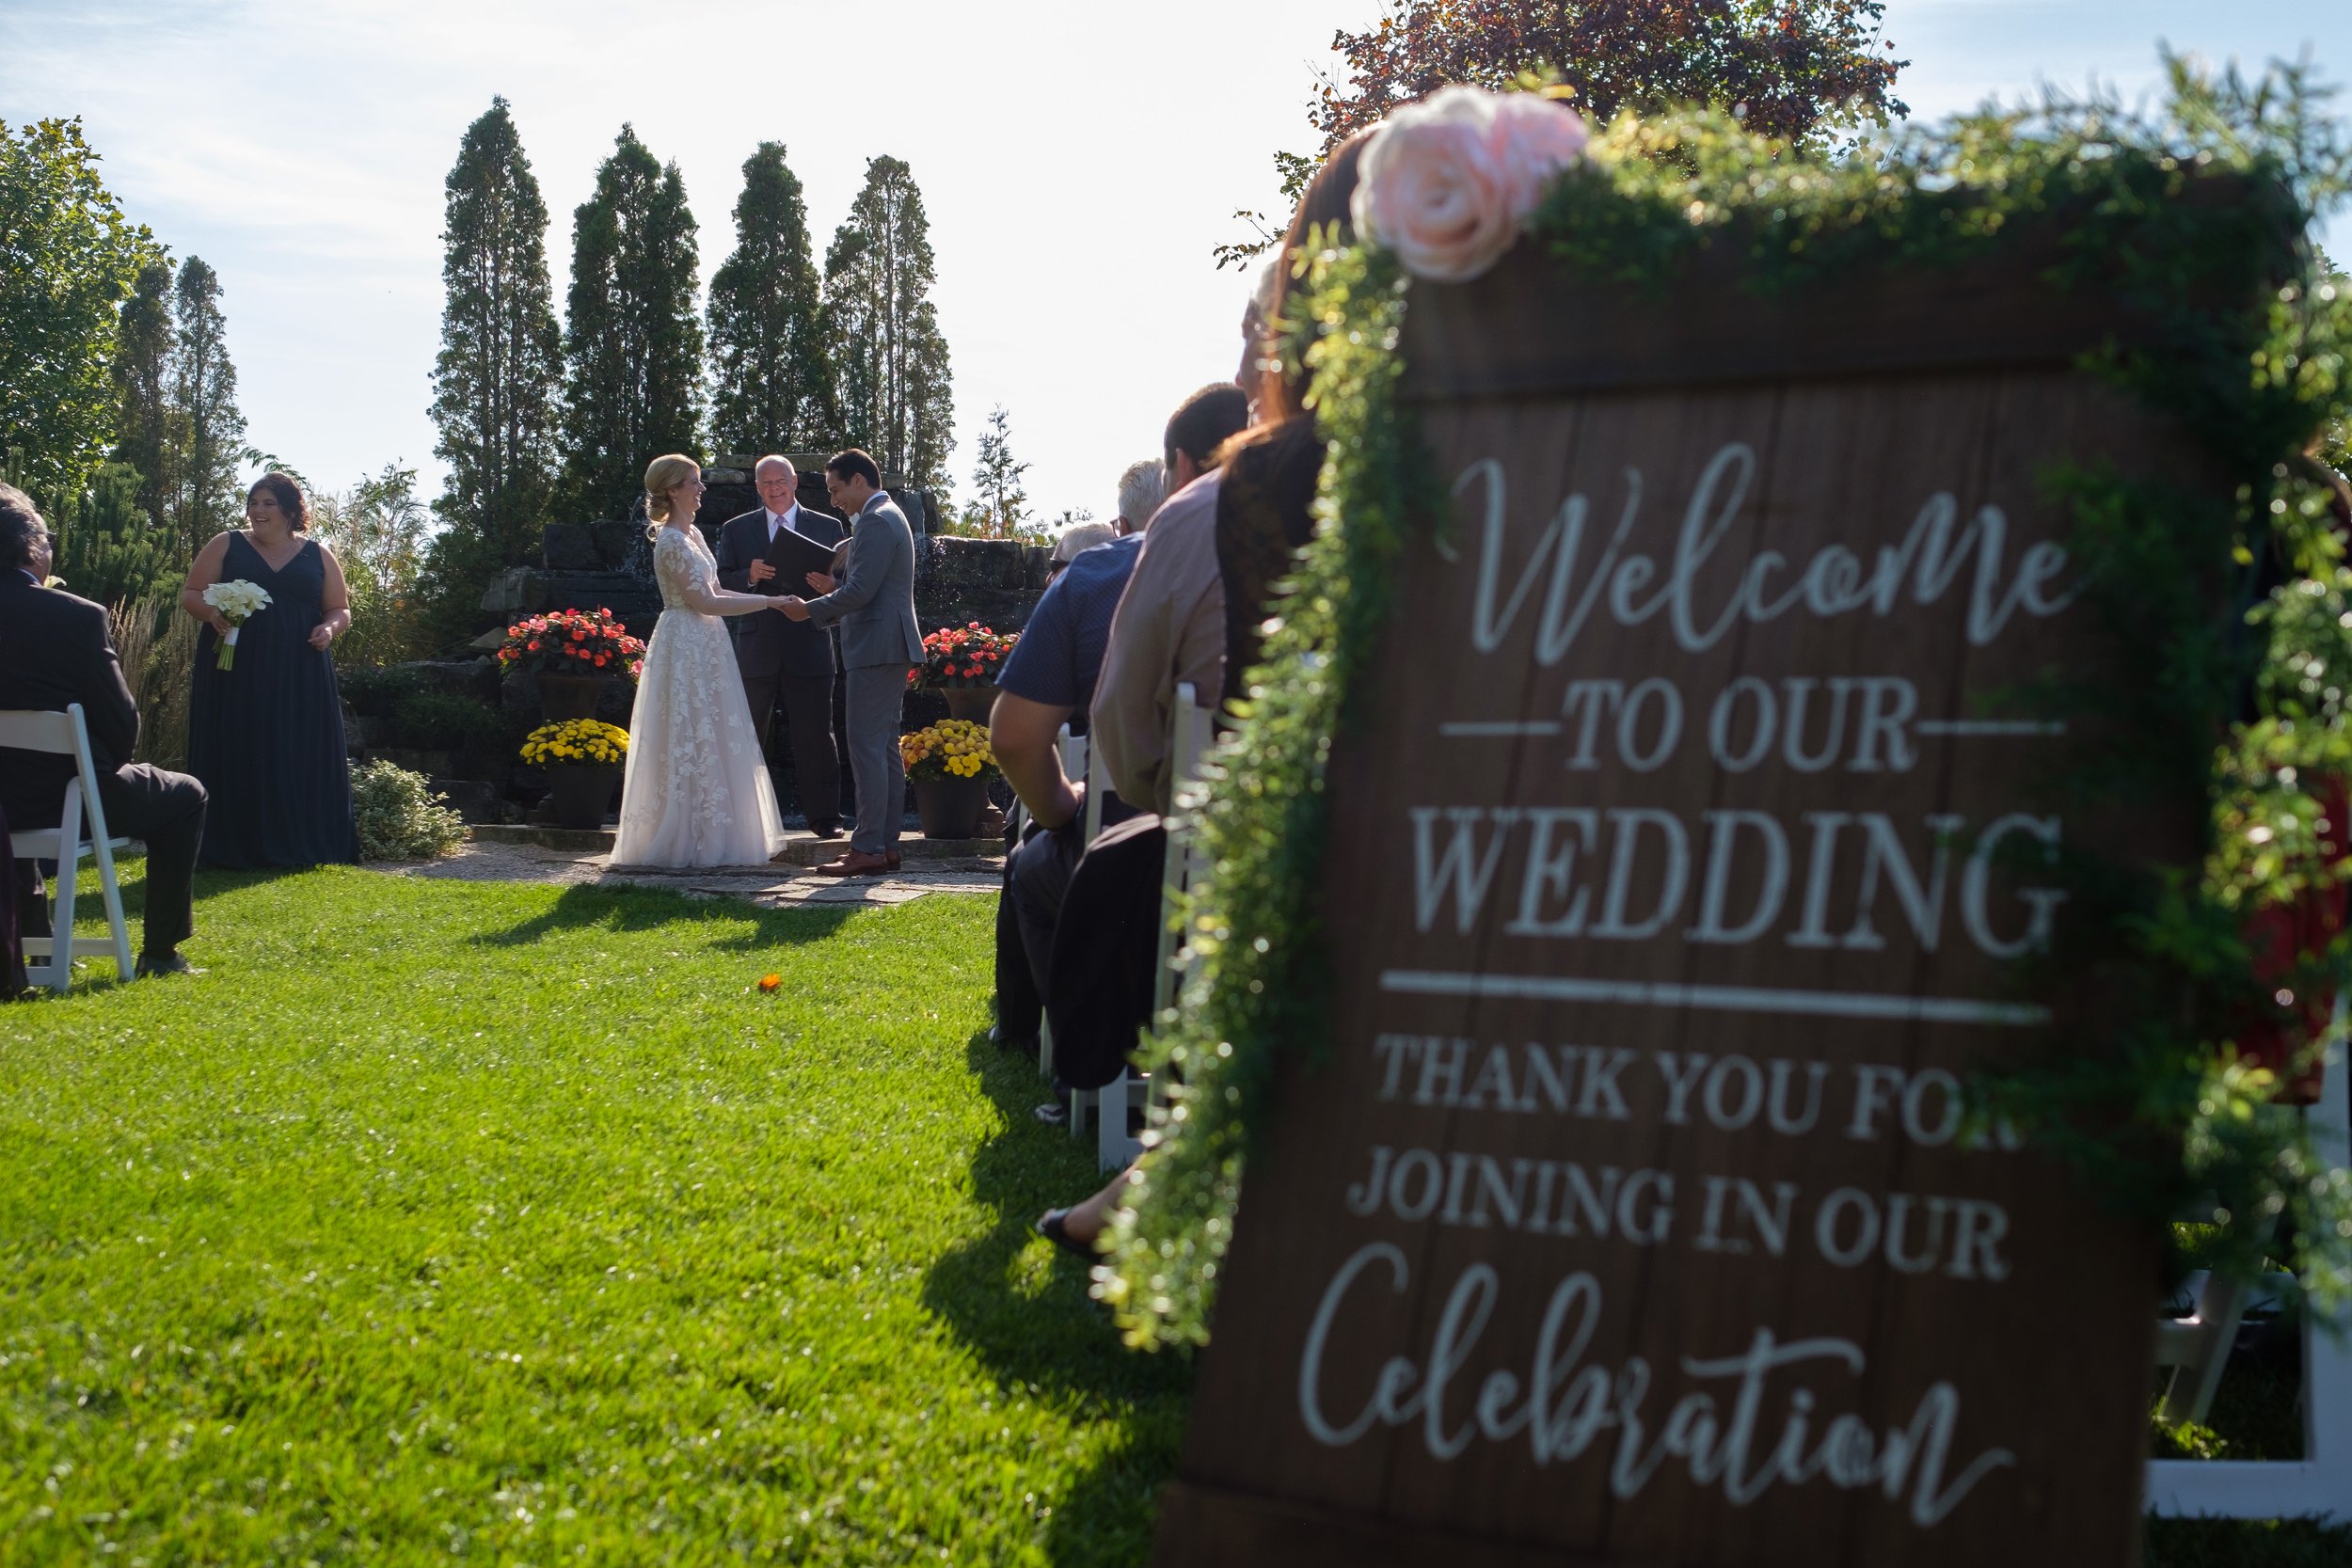  A candid colour wedding photograph during the outdoor wedding ceremony of  Cassandra and Antony’s wedding at the Hessenland Inn by Toronto wedding photographer Scott Williams. 